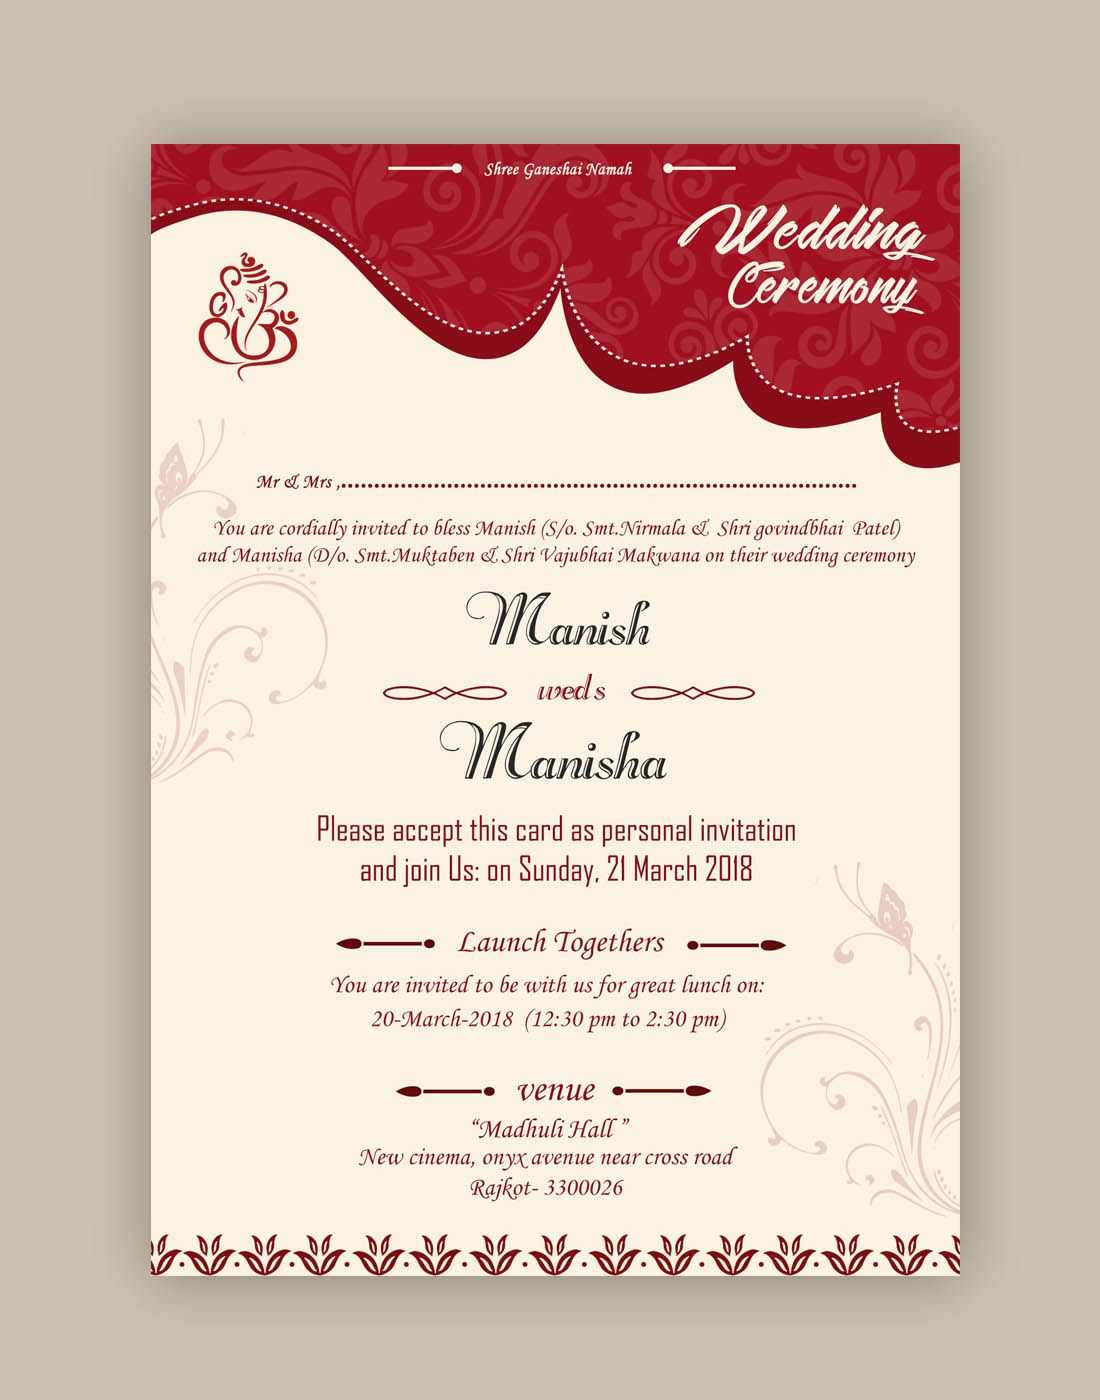 Free Wedding Card Psd Templates In 2019 | Free Wedding Cards For Invitation Cards Templates For Marriage